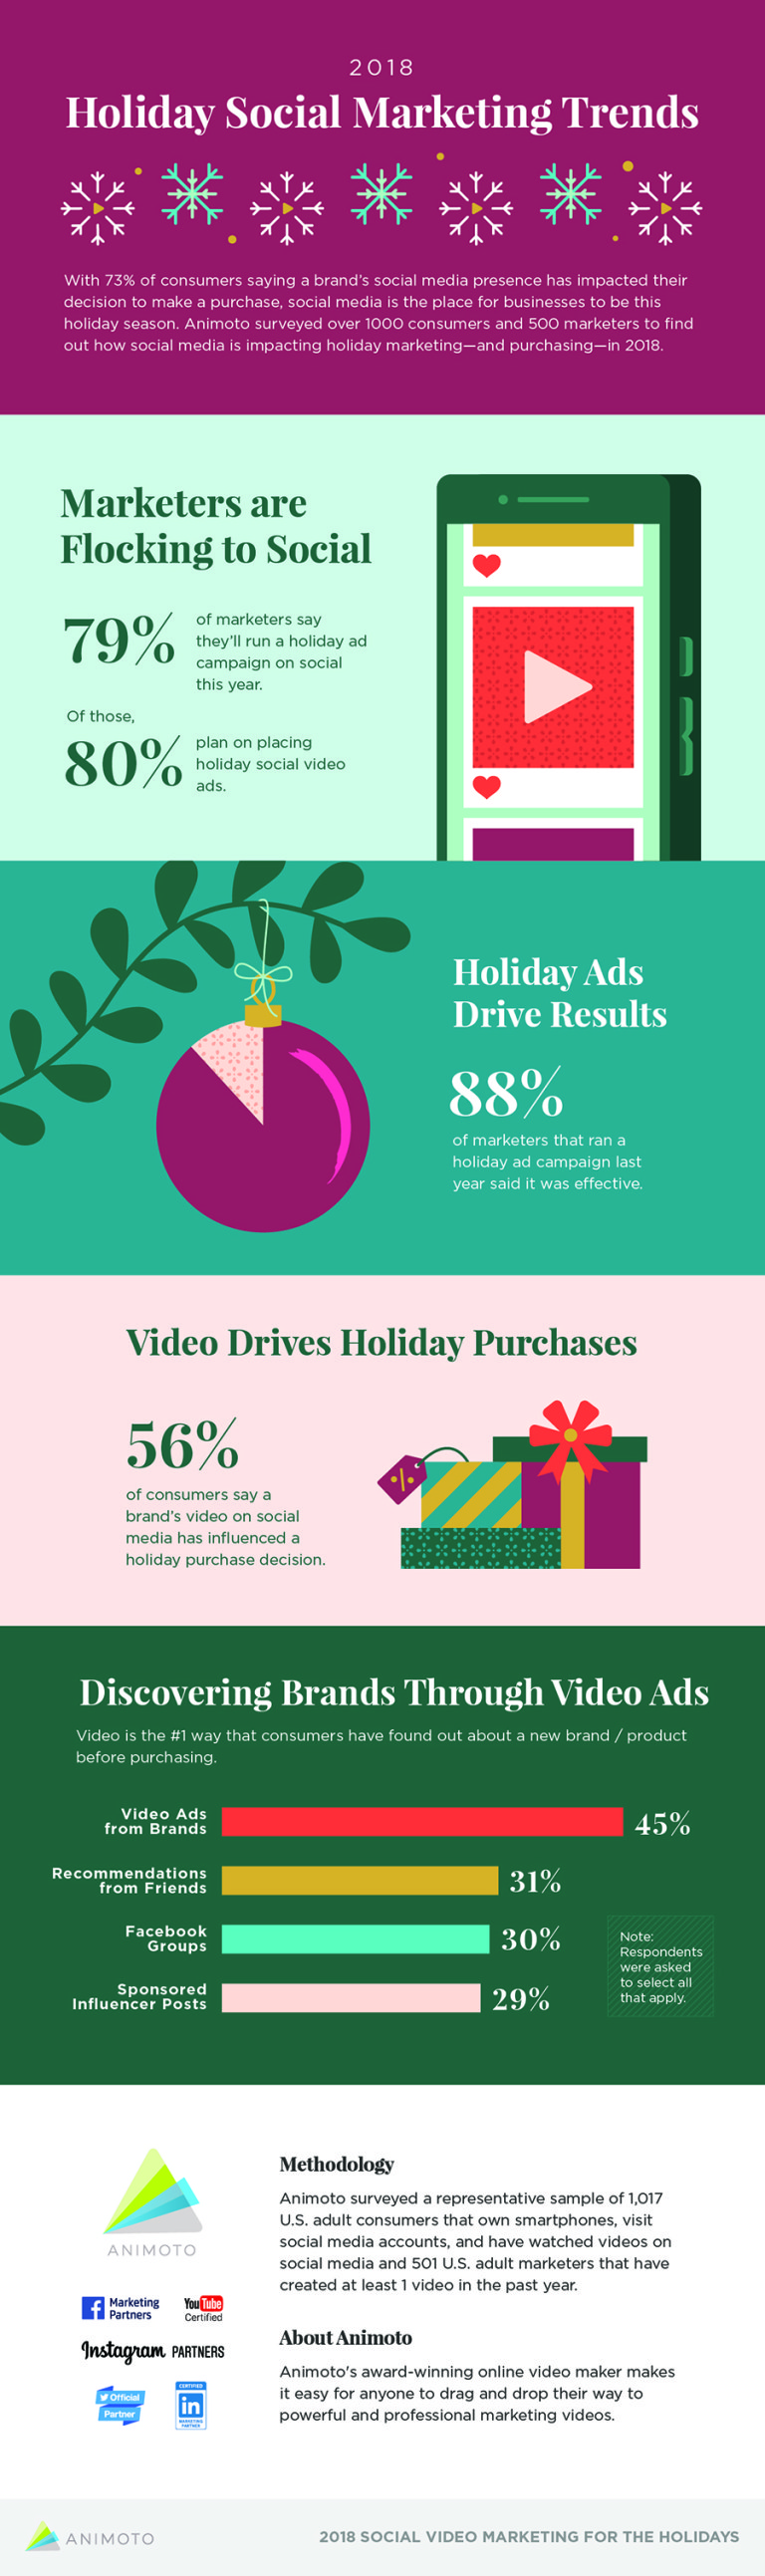 holiday social marketing trends in 2018